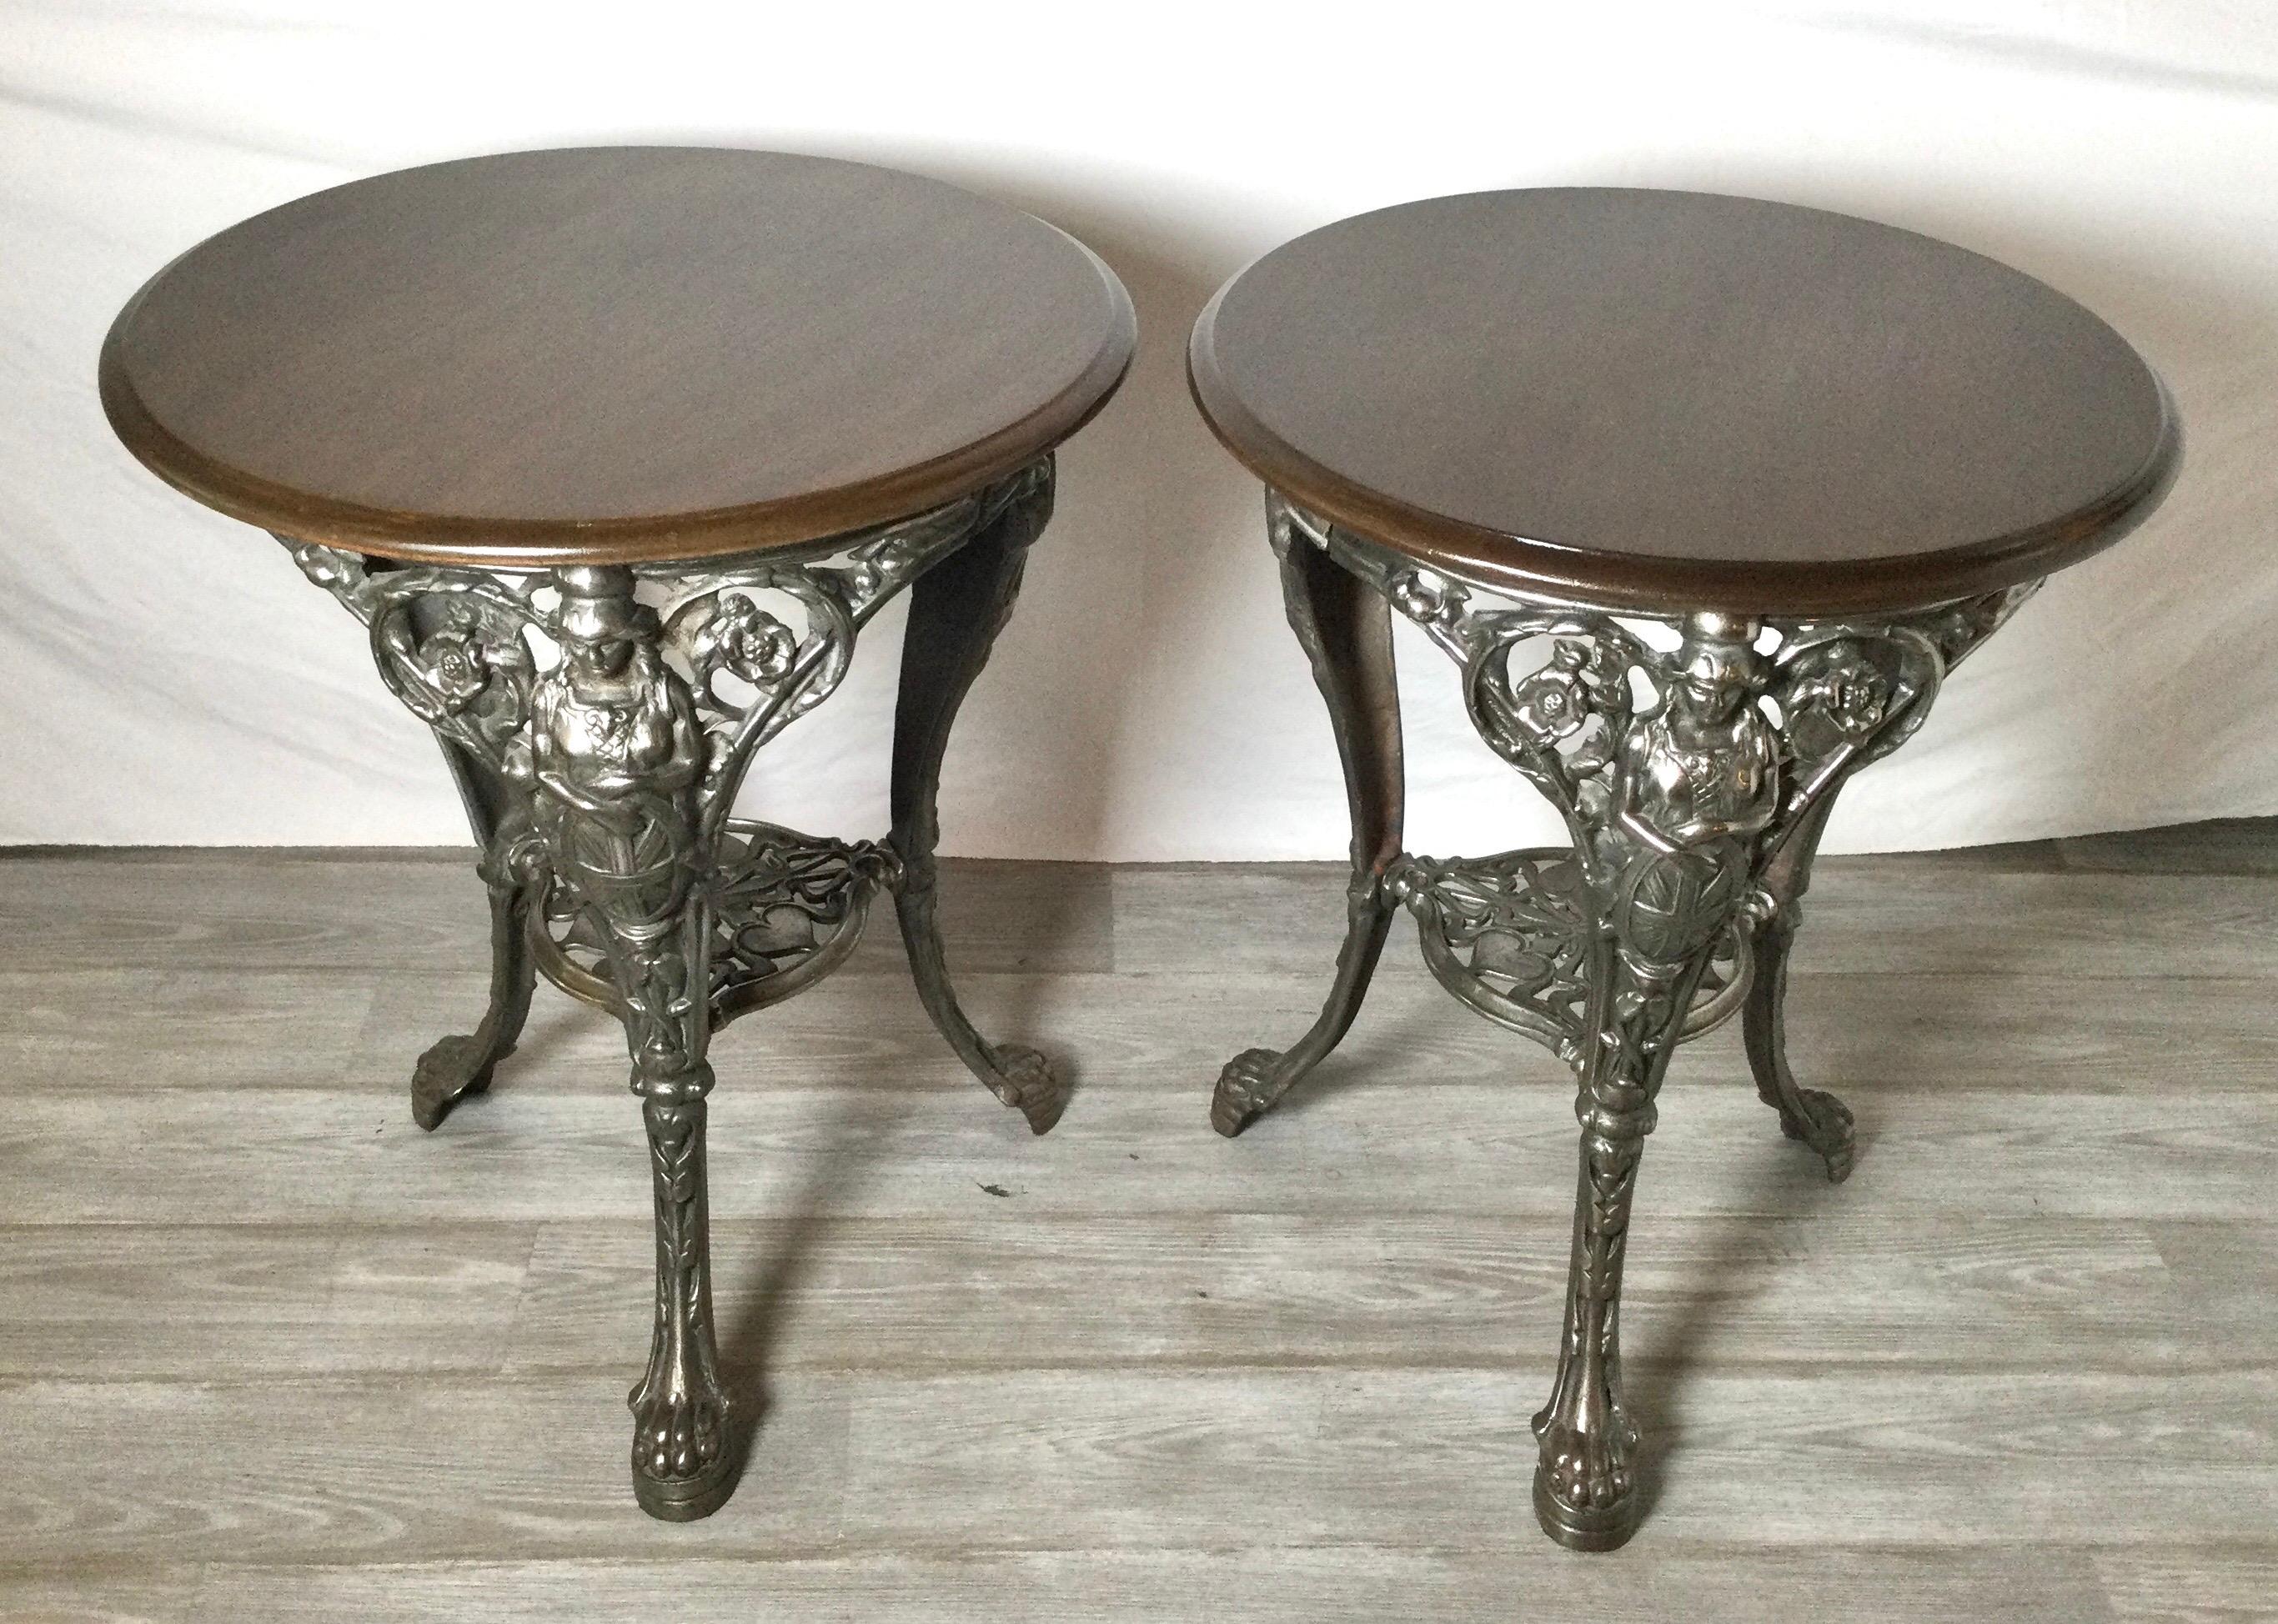 A pair of cast iron round pub tables with newer hardwood tops. The tables from 1875 with the old painted surface polished to the original iron finish. These table with figurative legs and thee paw feet.